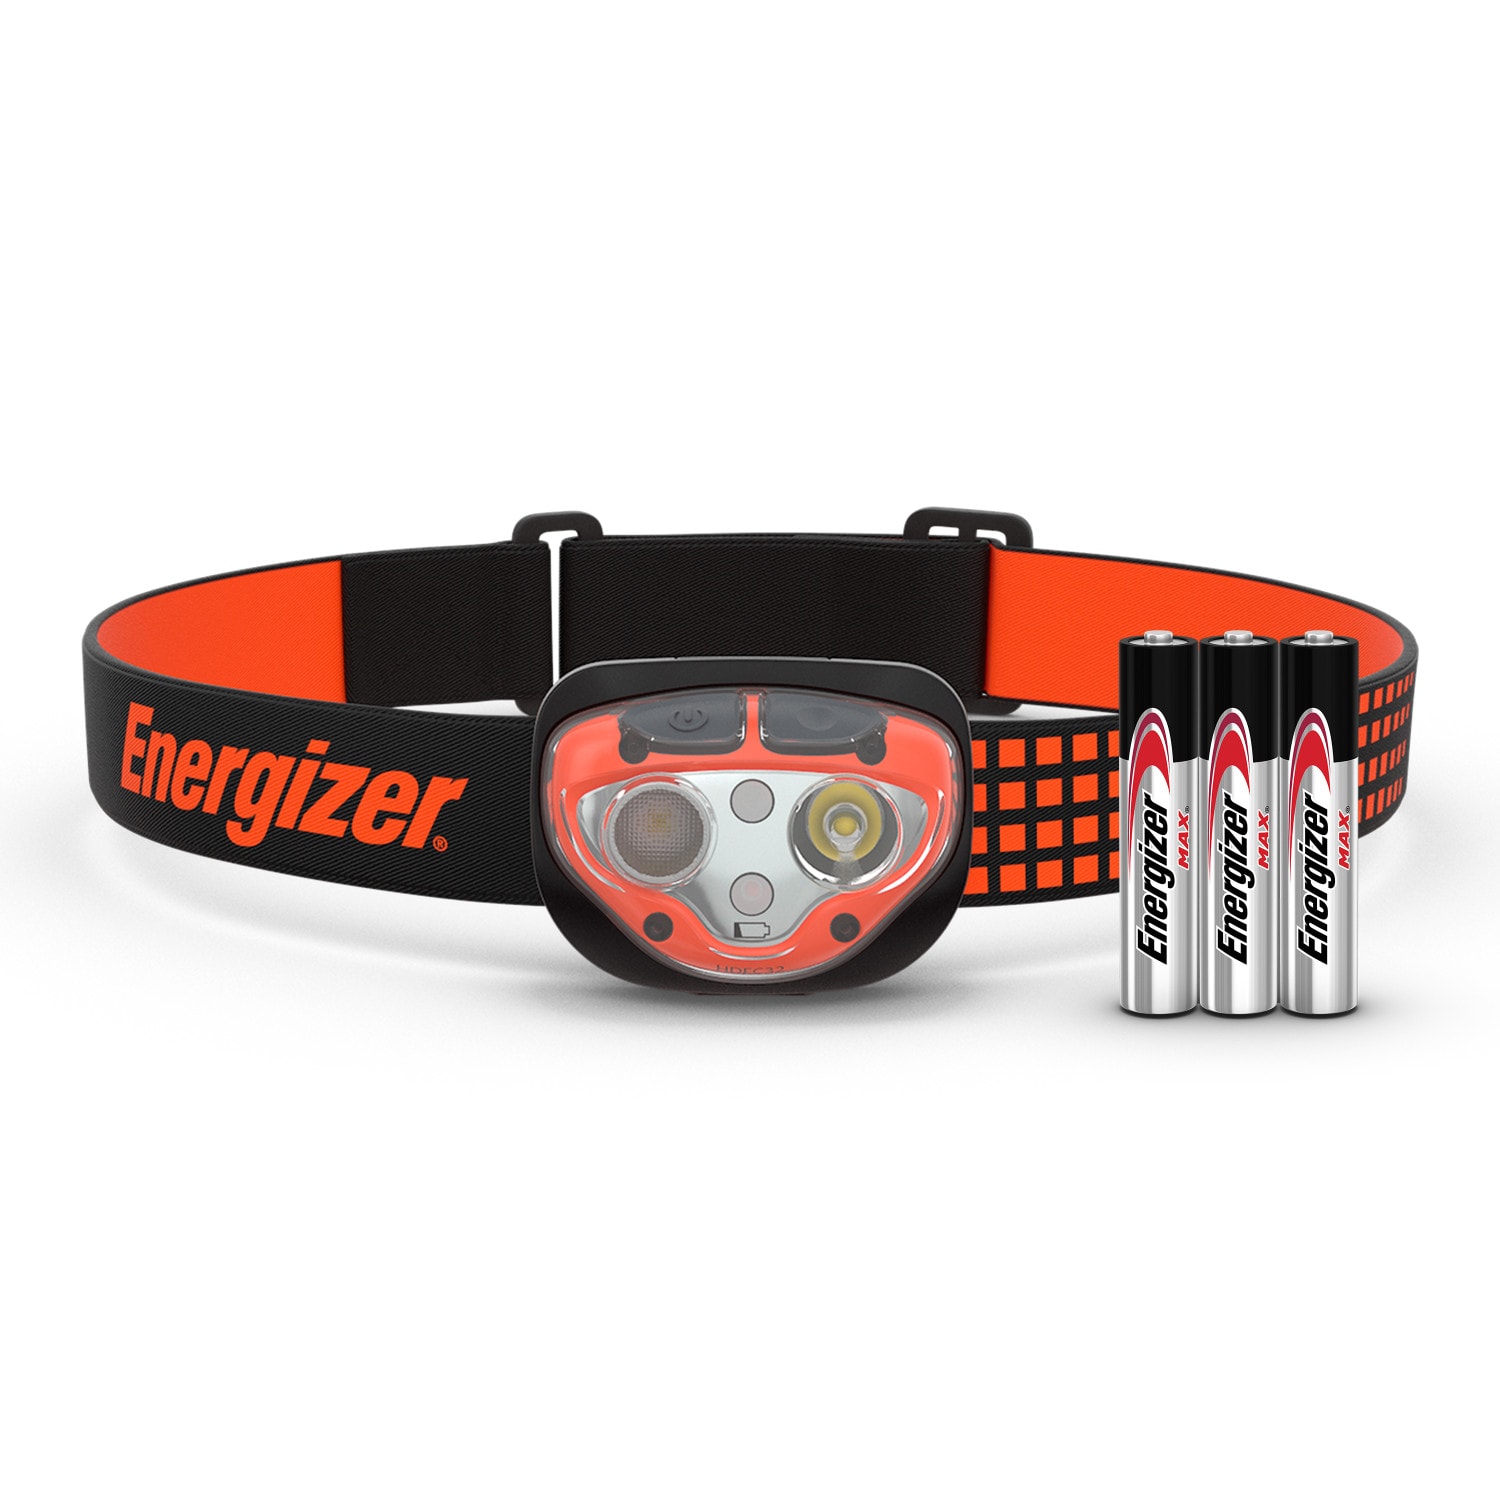 LED 450-Lumen Headlamp Included) (Battery Vision at in Headlamps the Energizer department